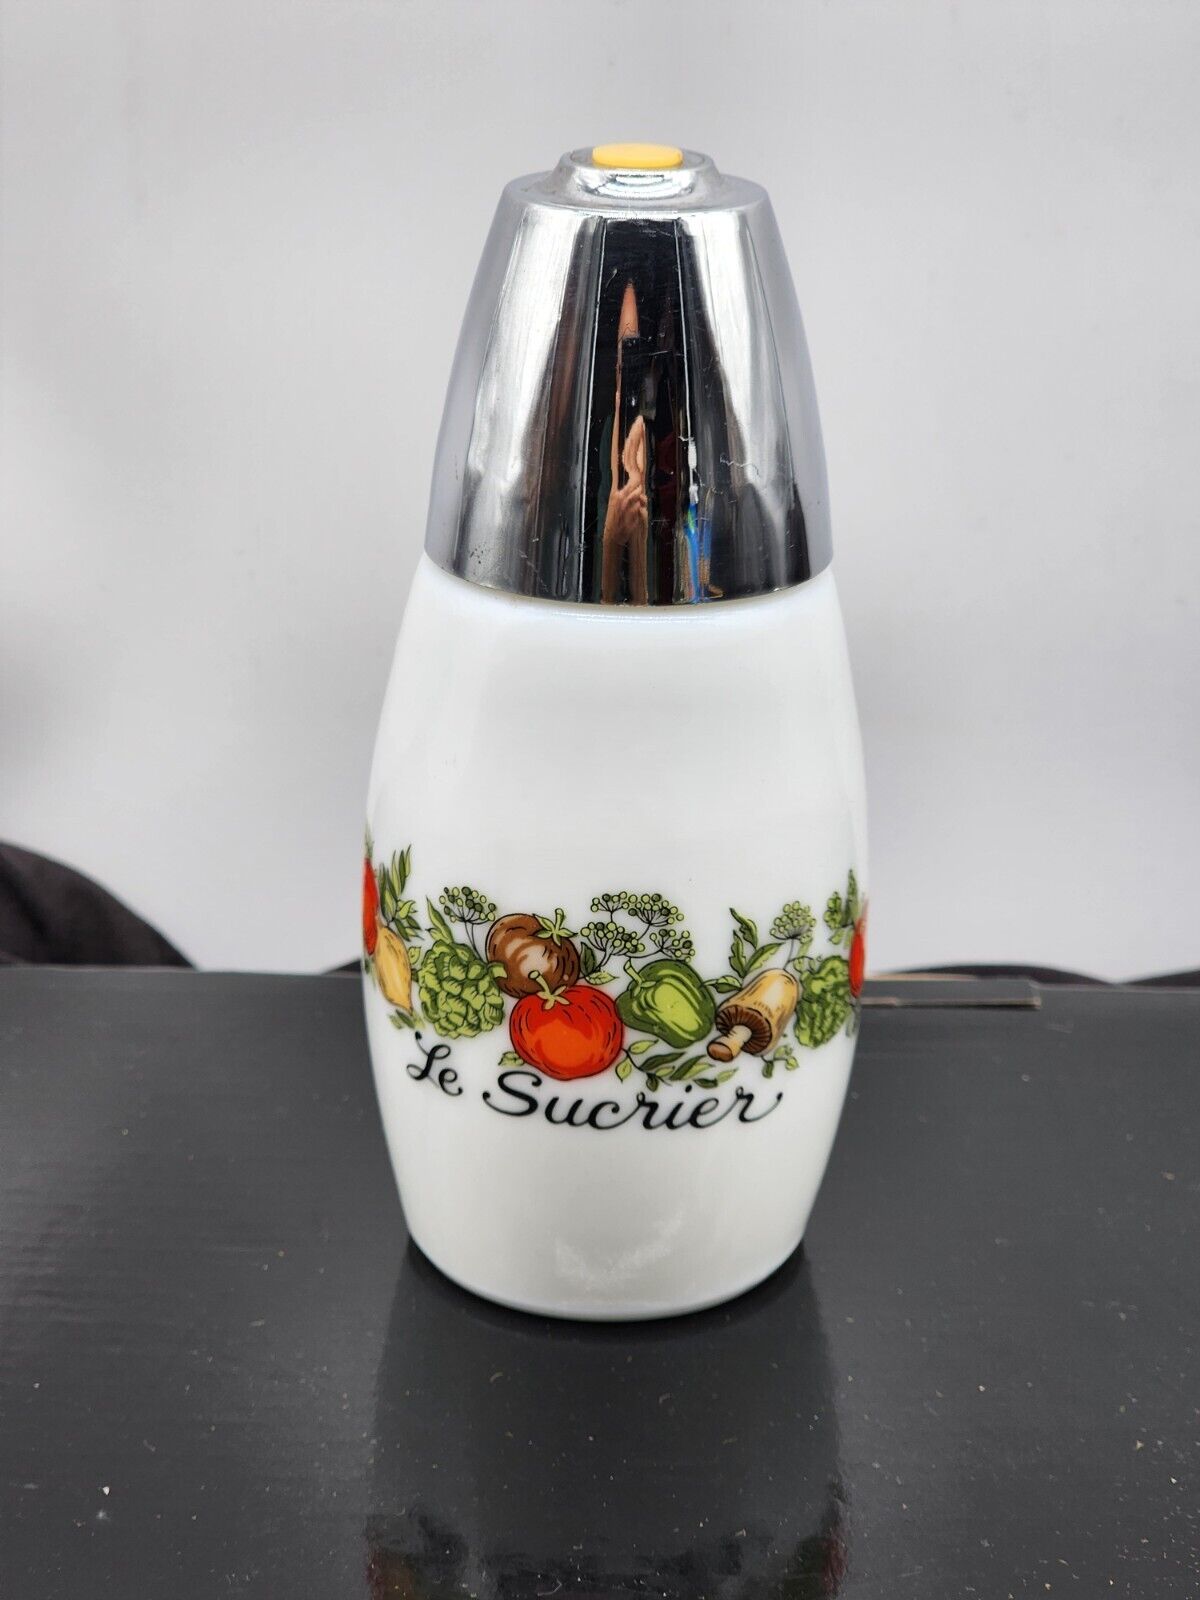 Vintage Gemco Spice Of Life Le Sucrier Sugar Dispenser | Centura by Corning